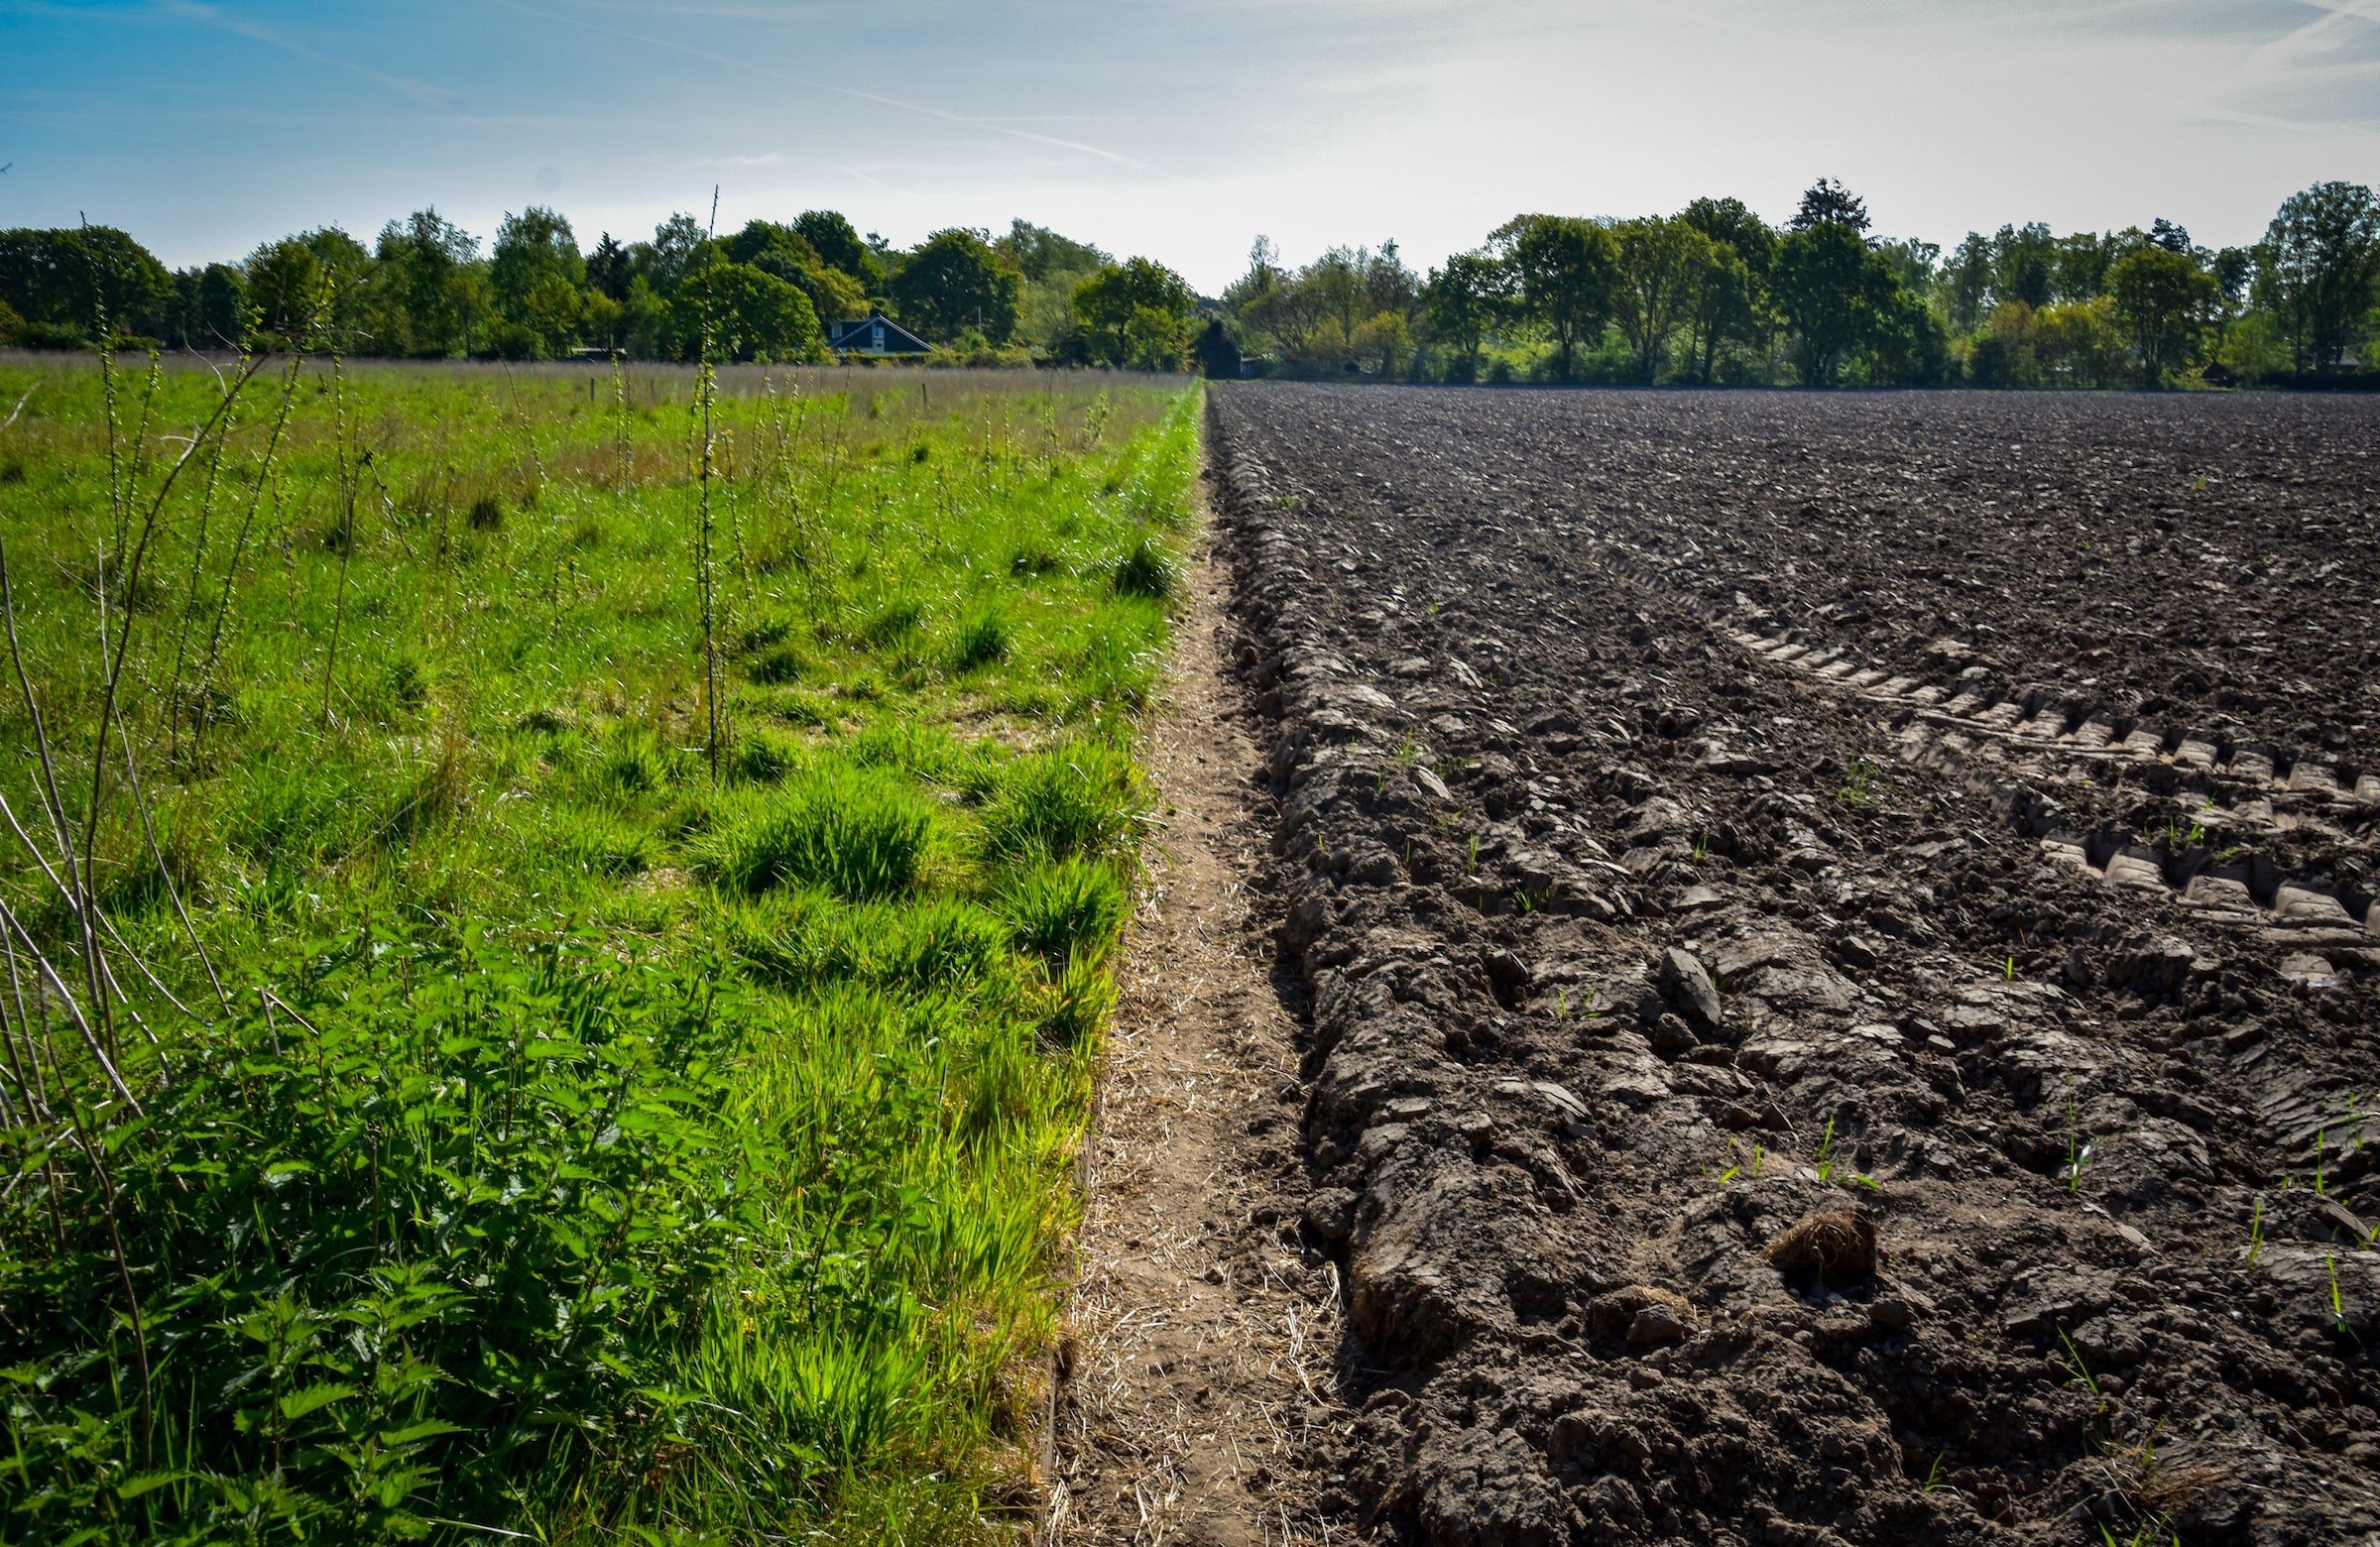 On one side of a dirt path, there are green grasses, while on the other, there is freshly-tilled dirt